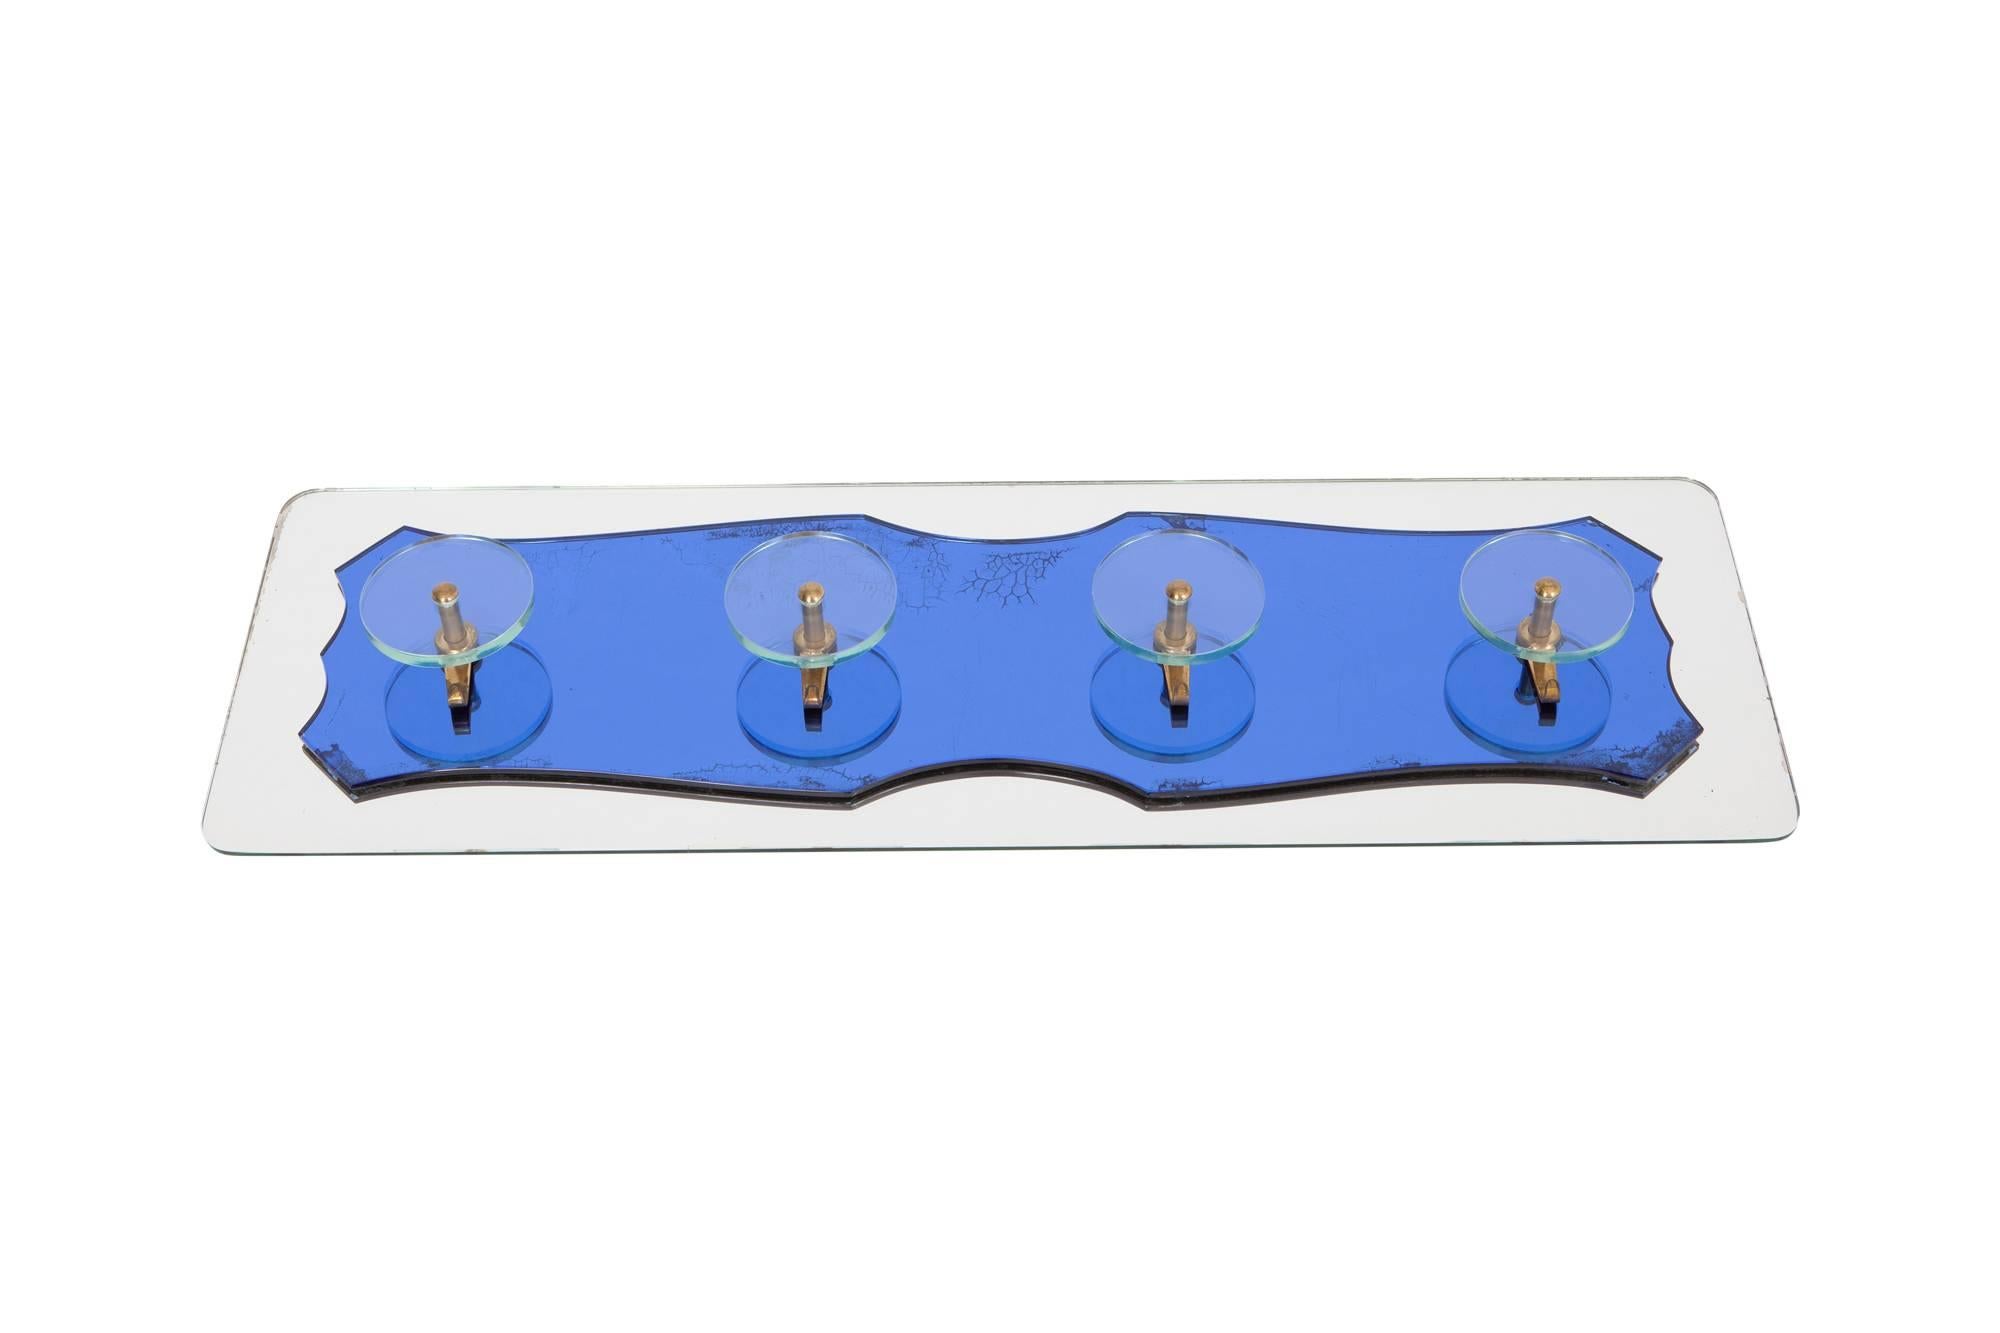 Mid-Century Modern rectangular coatrack in Fontana Arte style, Italy, the 1970s. The mirrored and blue colored glass that is cutout in an interesting shape.
The blue glass shows some panting which gives it a characteristic look. The four-round